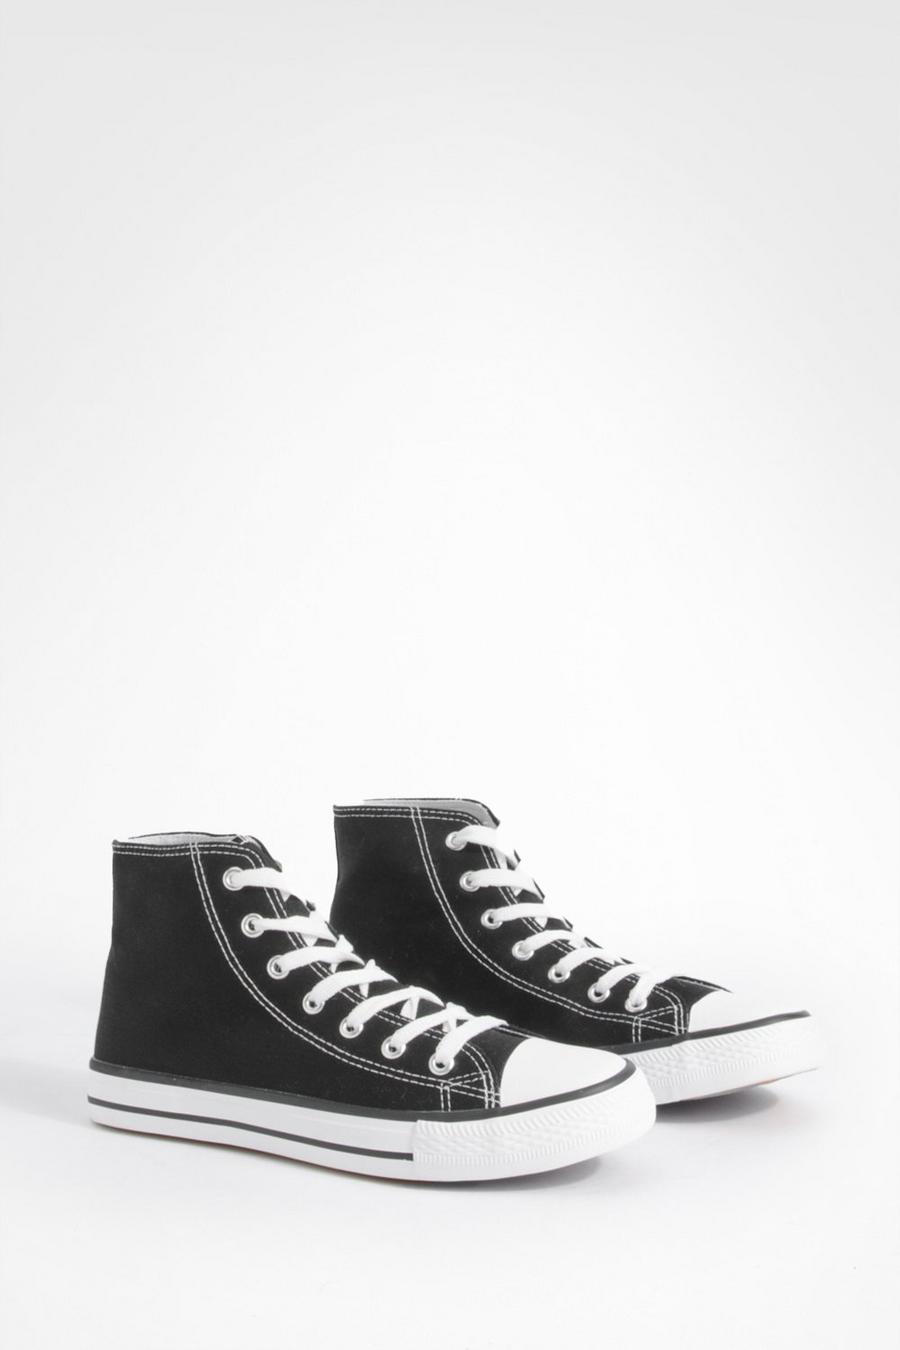 Black High Top Lace Up Sneakers